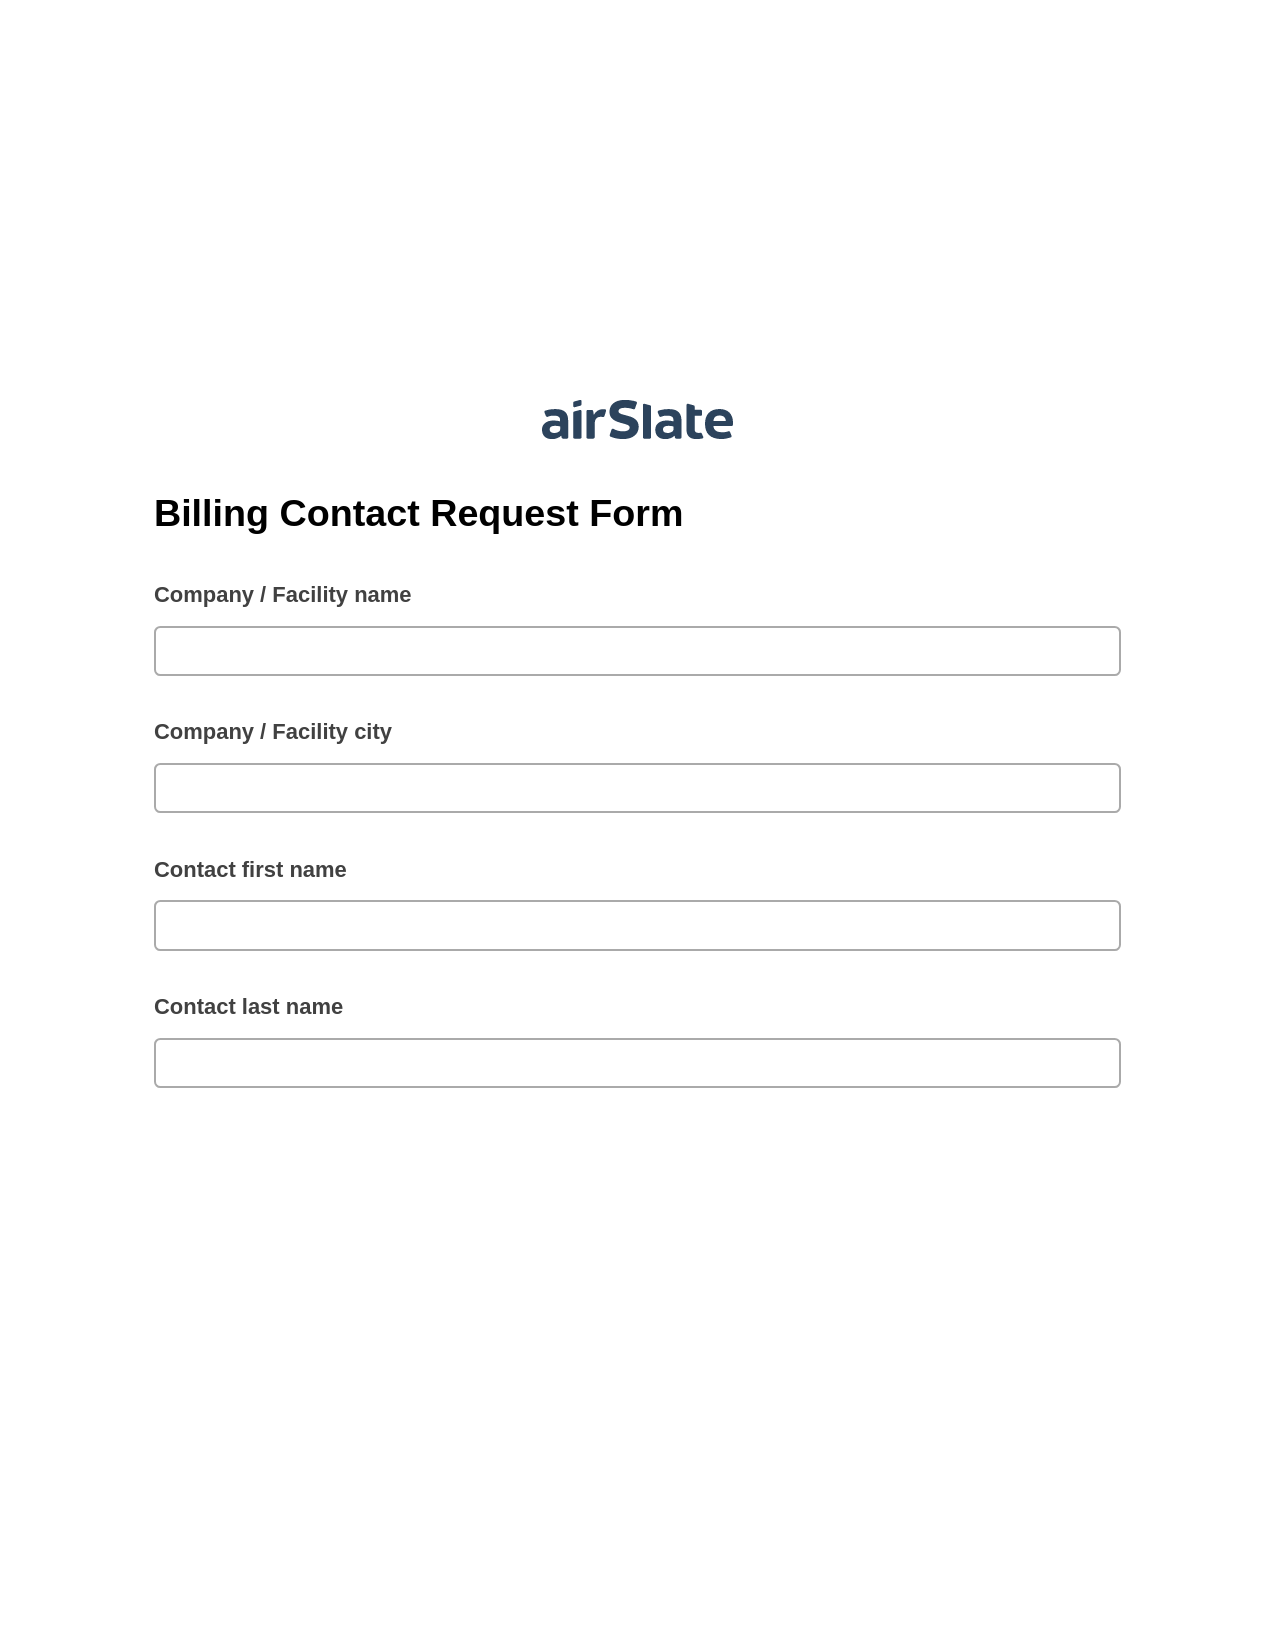 Multirole Billing Contact Request Form Pre-fill Document Bot, Pre-fill with Custom Data Bot, Google Drive Bot